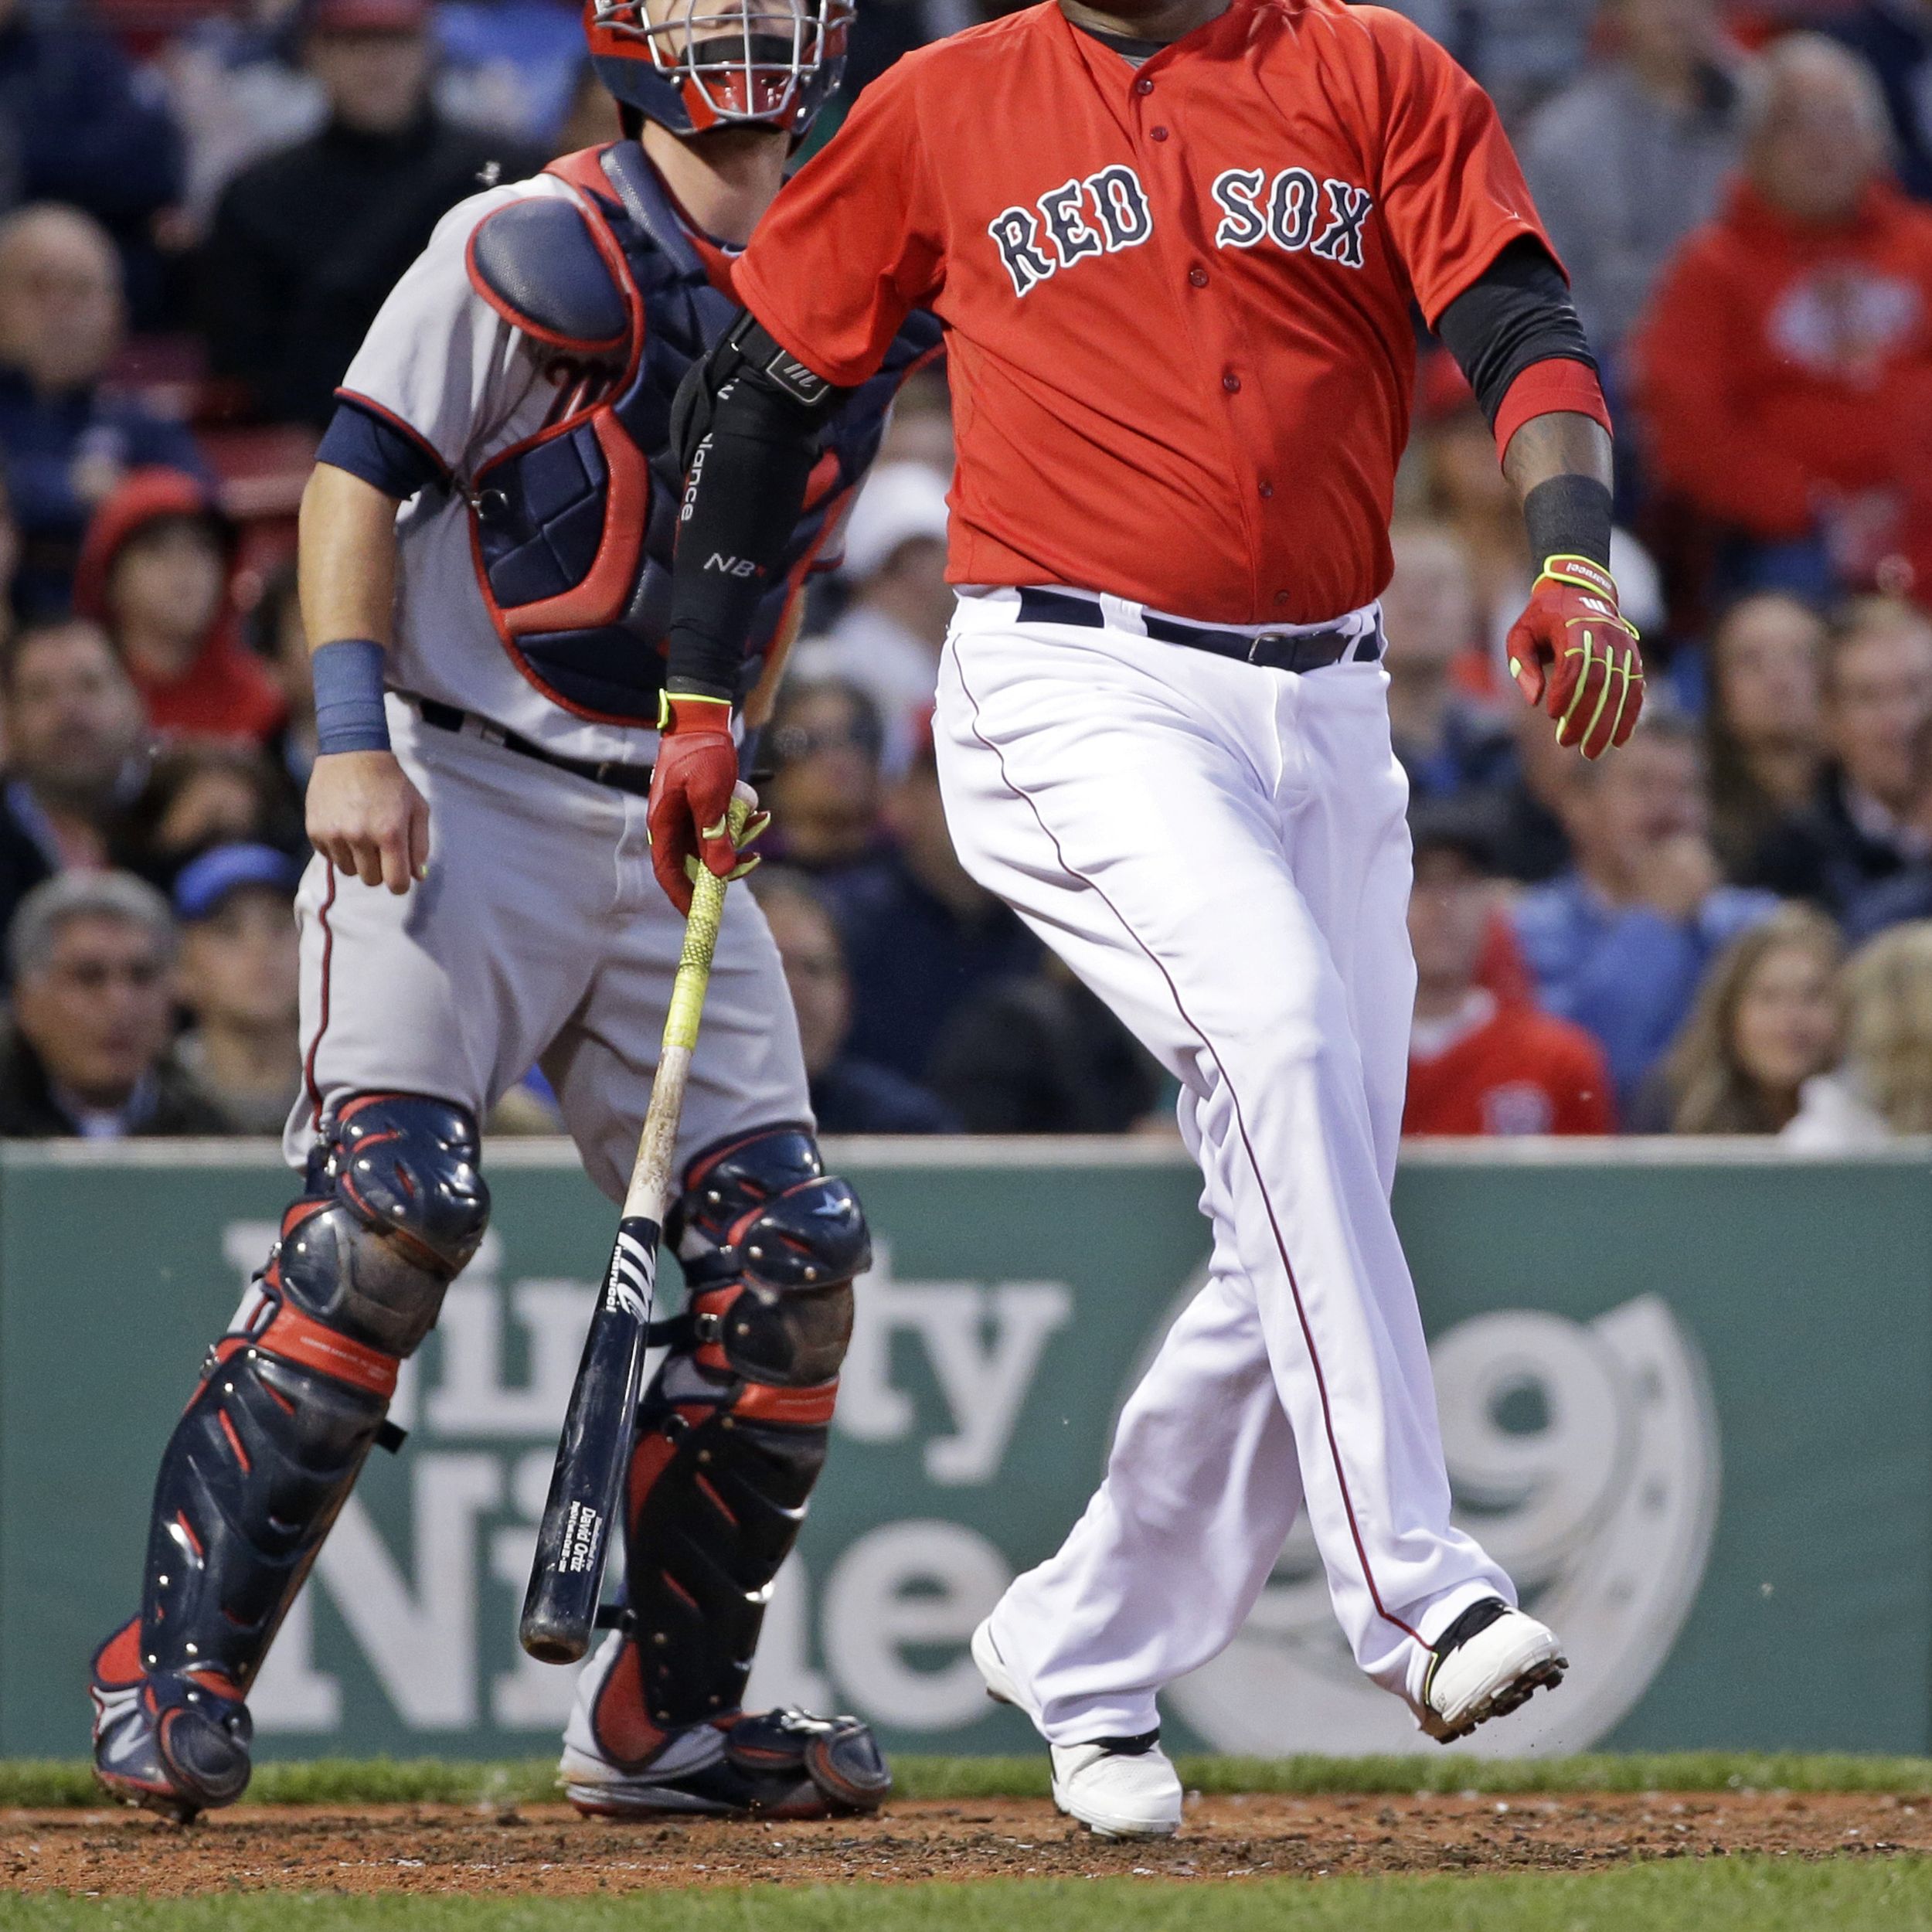 Record night for David Ortiz as Boston Red Sox beat Seattle Mariners